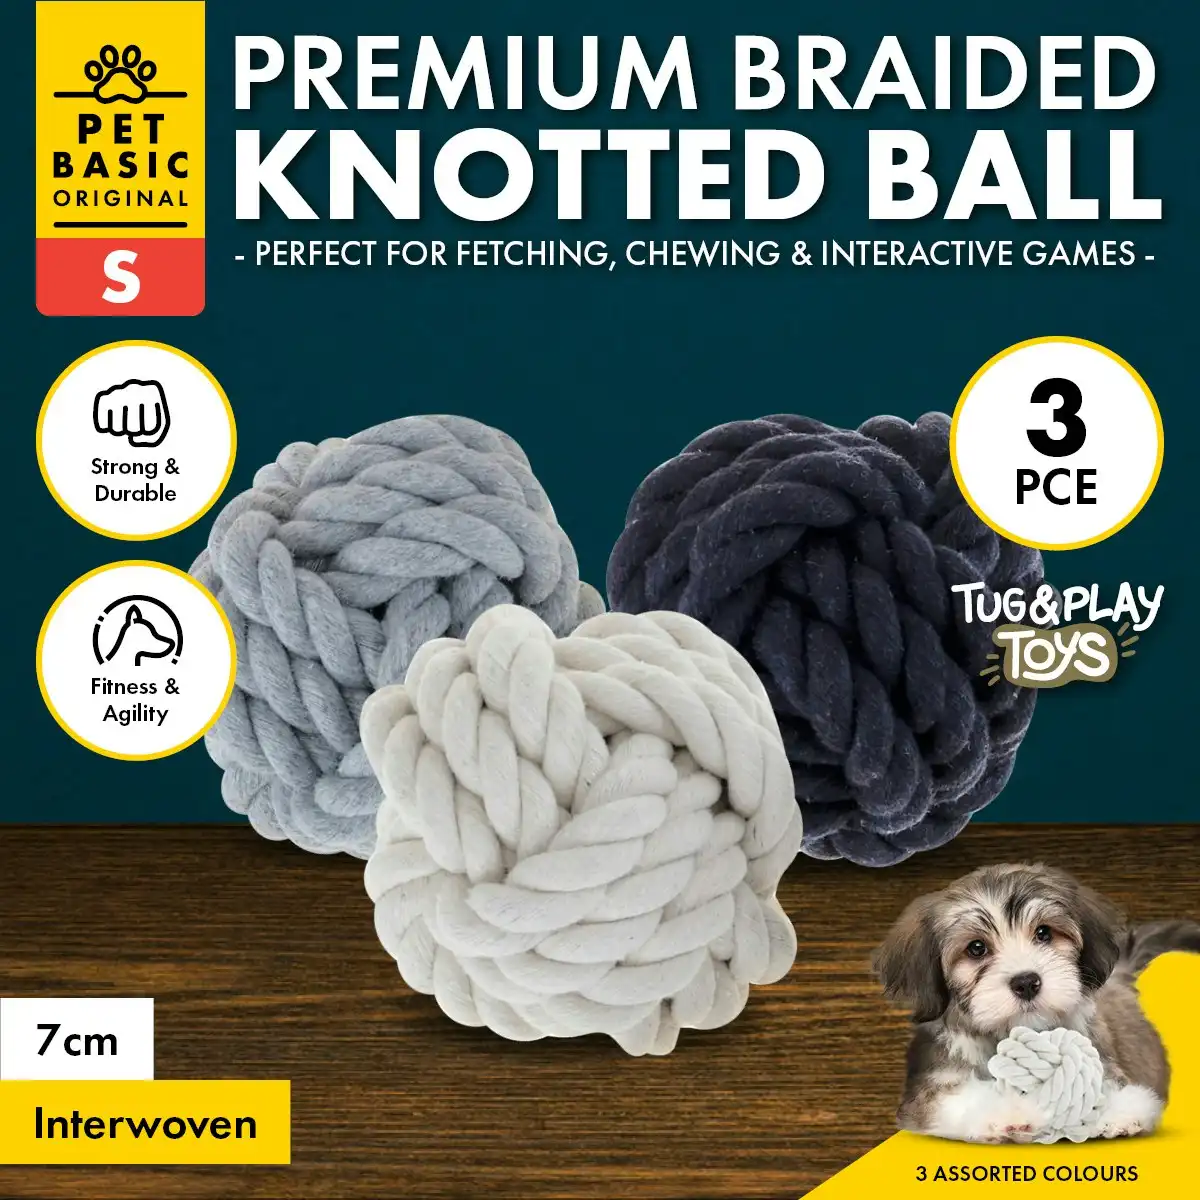 Pet Basic 3PCE Premium Braided Knotted Ball Size Small Natural Fibres 7cm